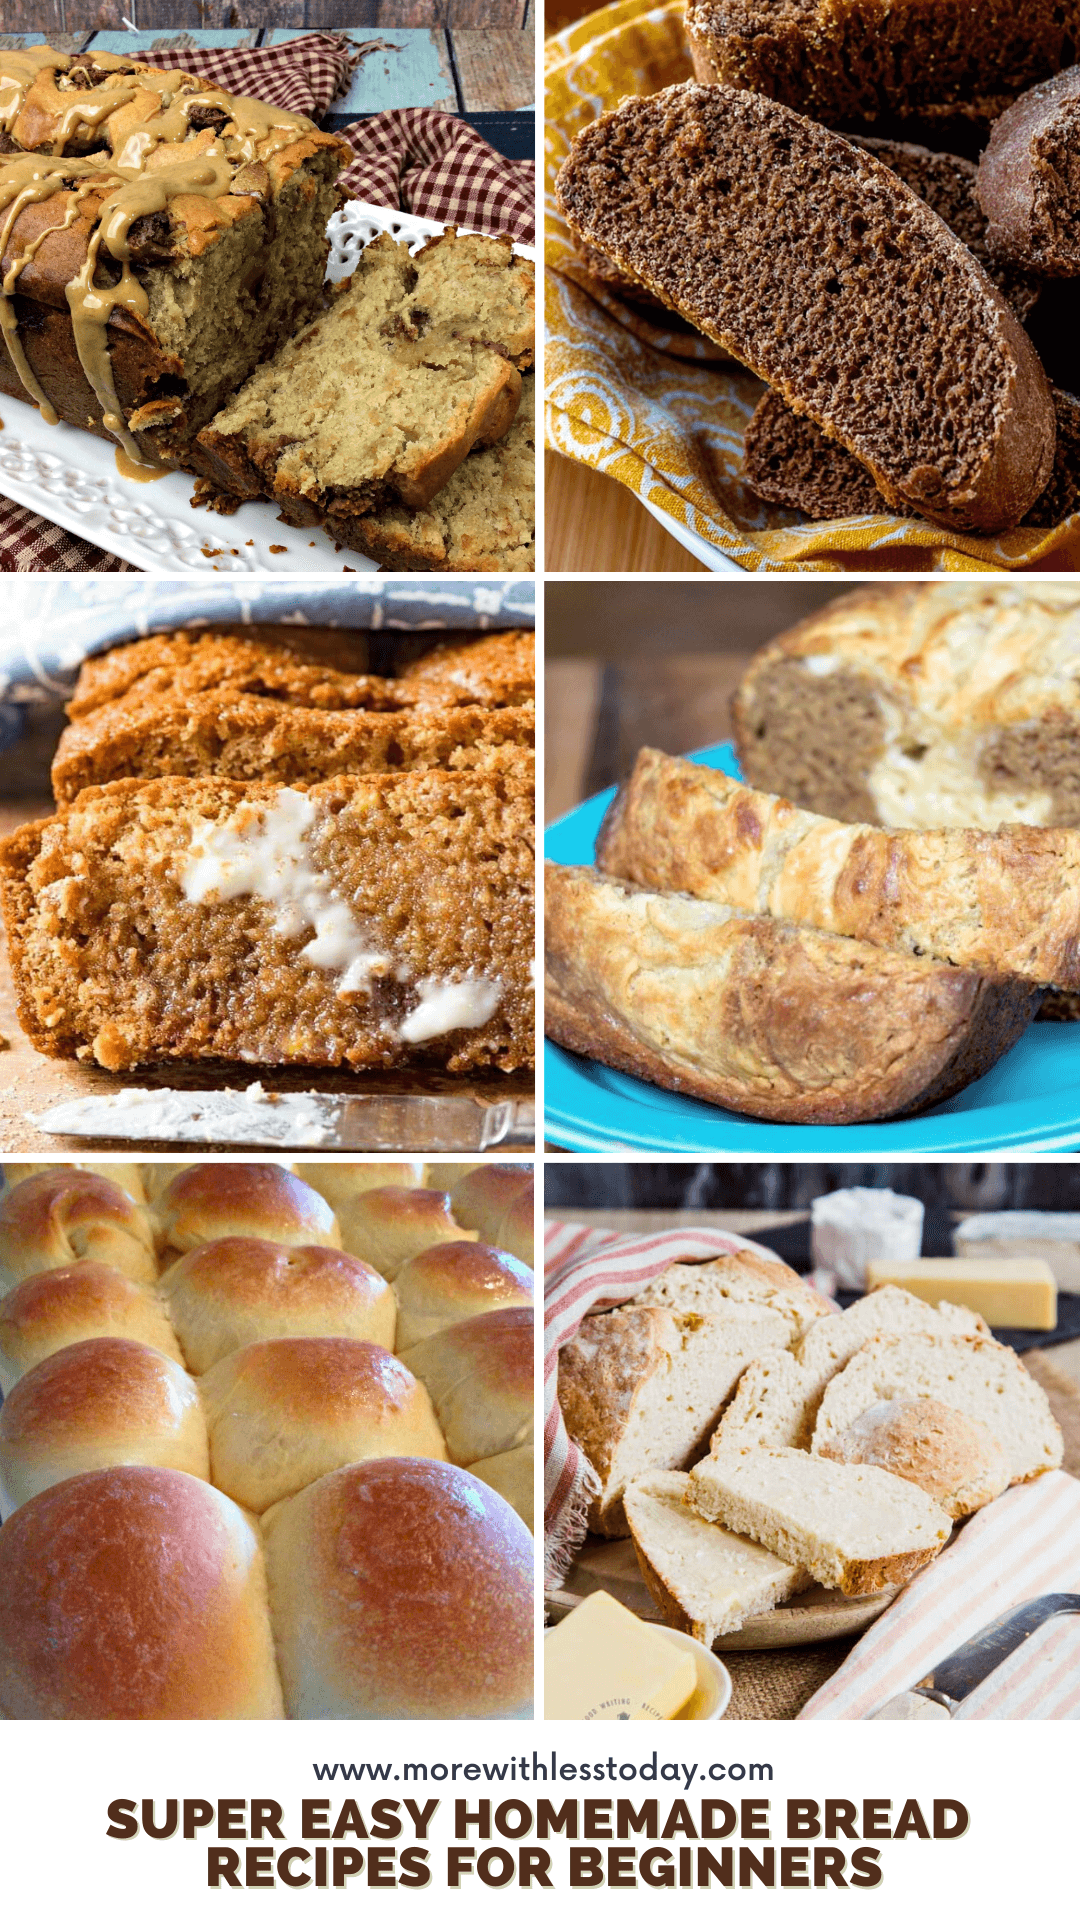 Super Easy Homemade Bread Recipes for Beginners - PIN